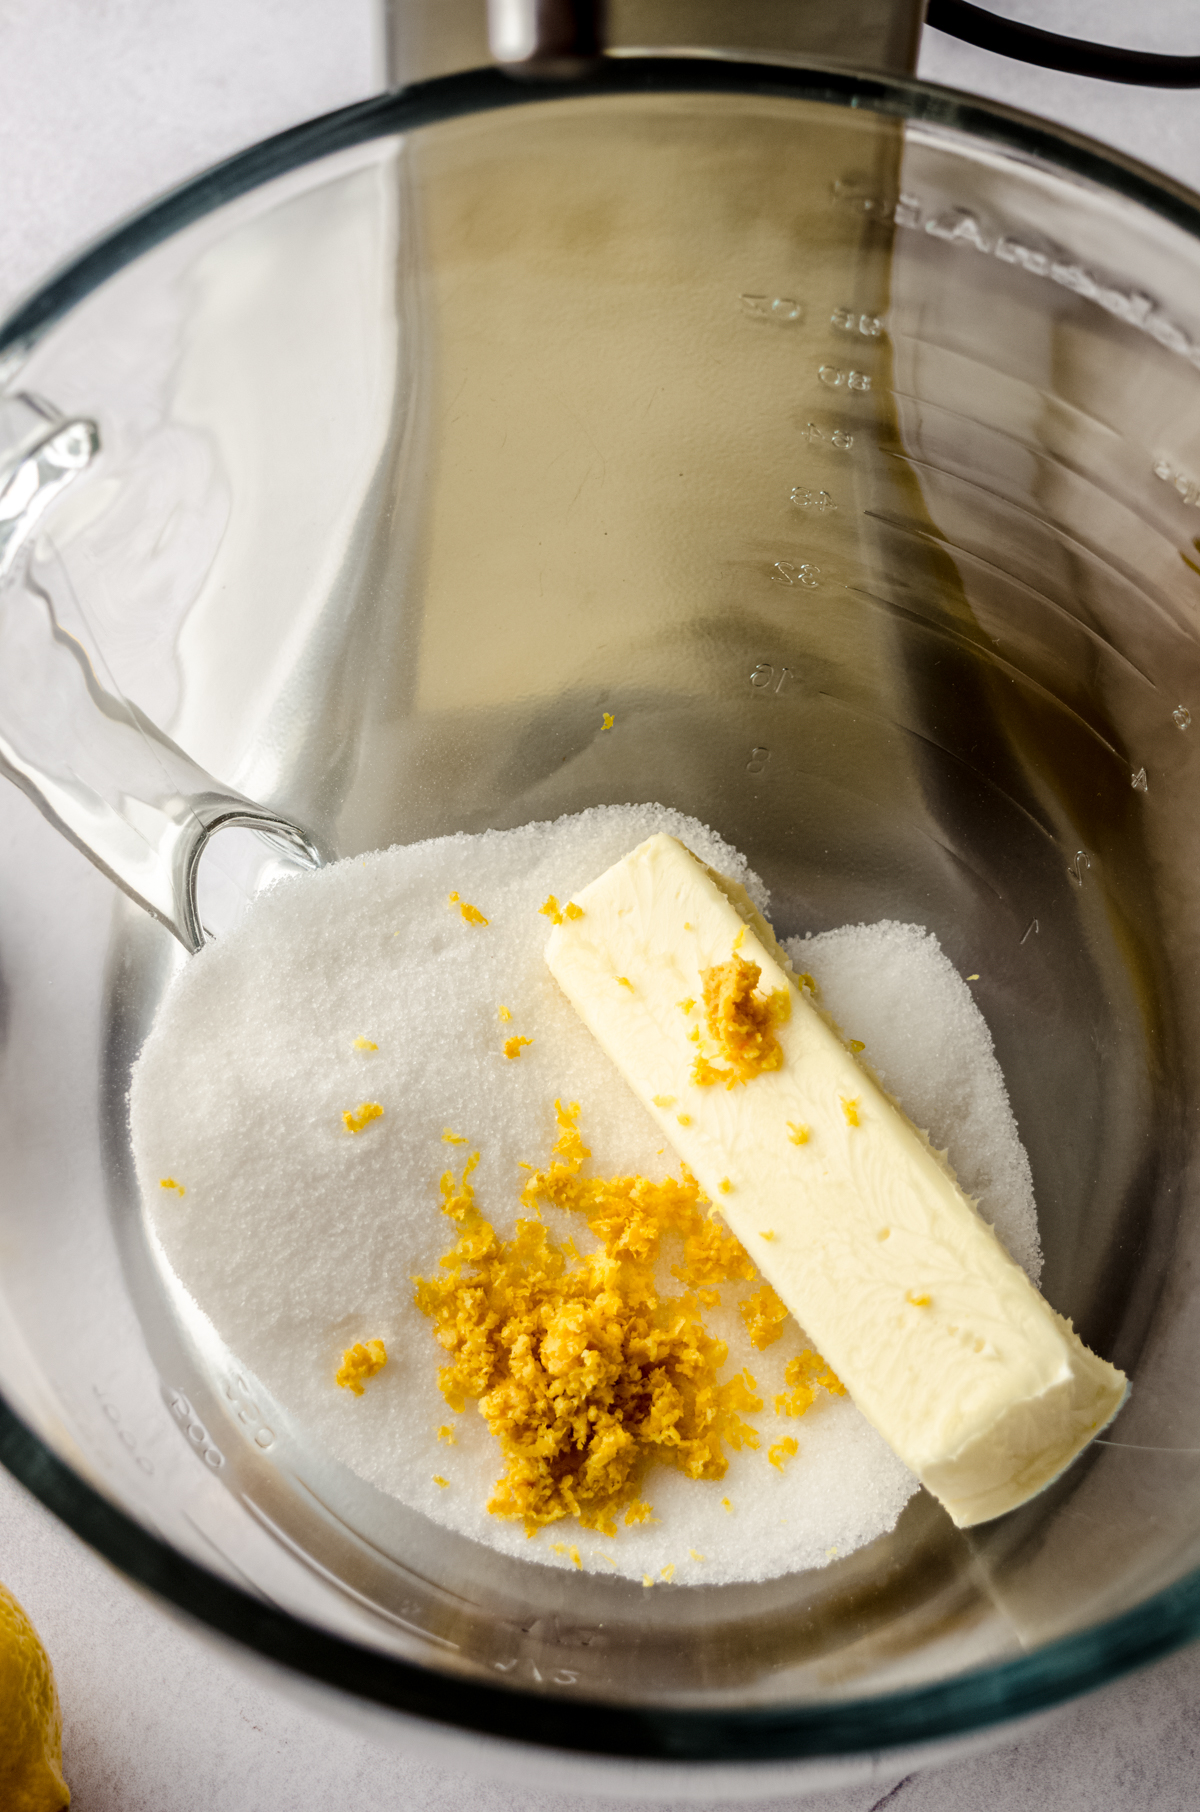 The bowl of a stand mixer with butter, sugar, and lemon zest in it.